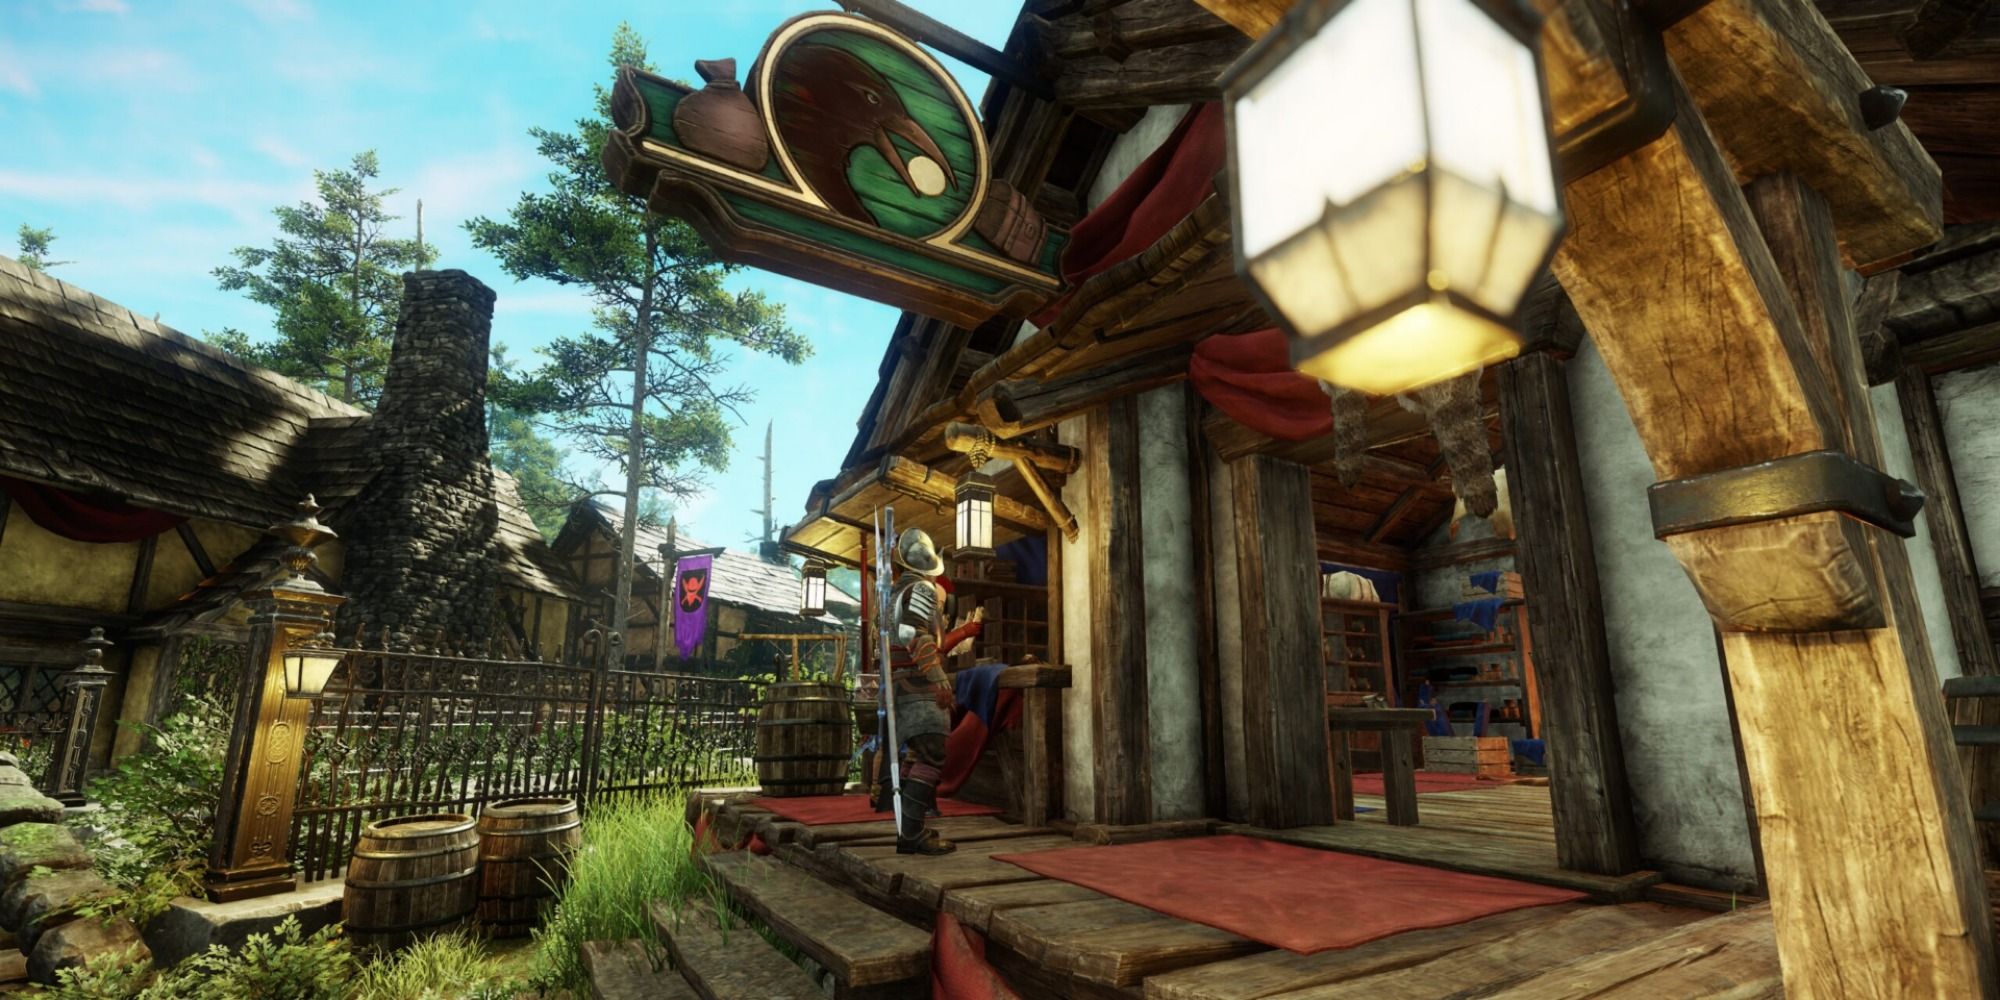 A player stands at a trading post counter in a town